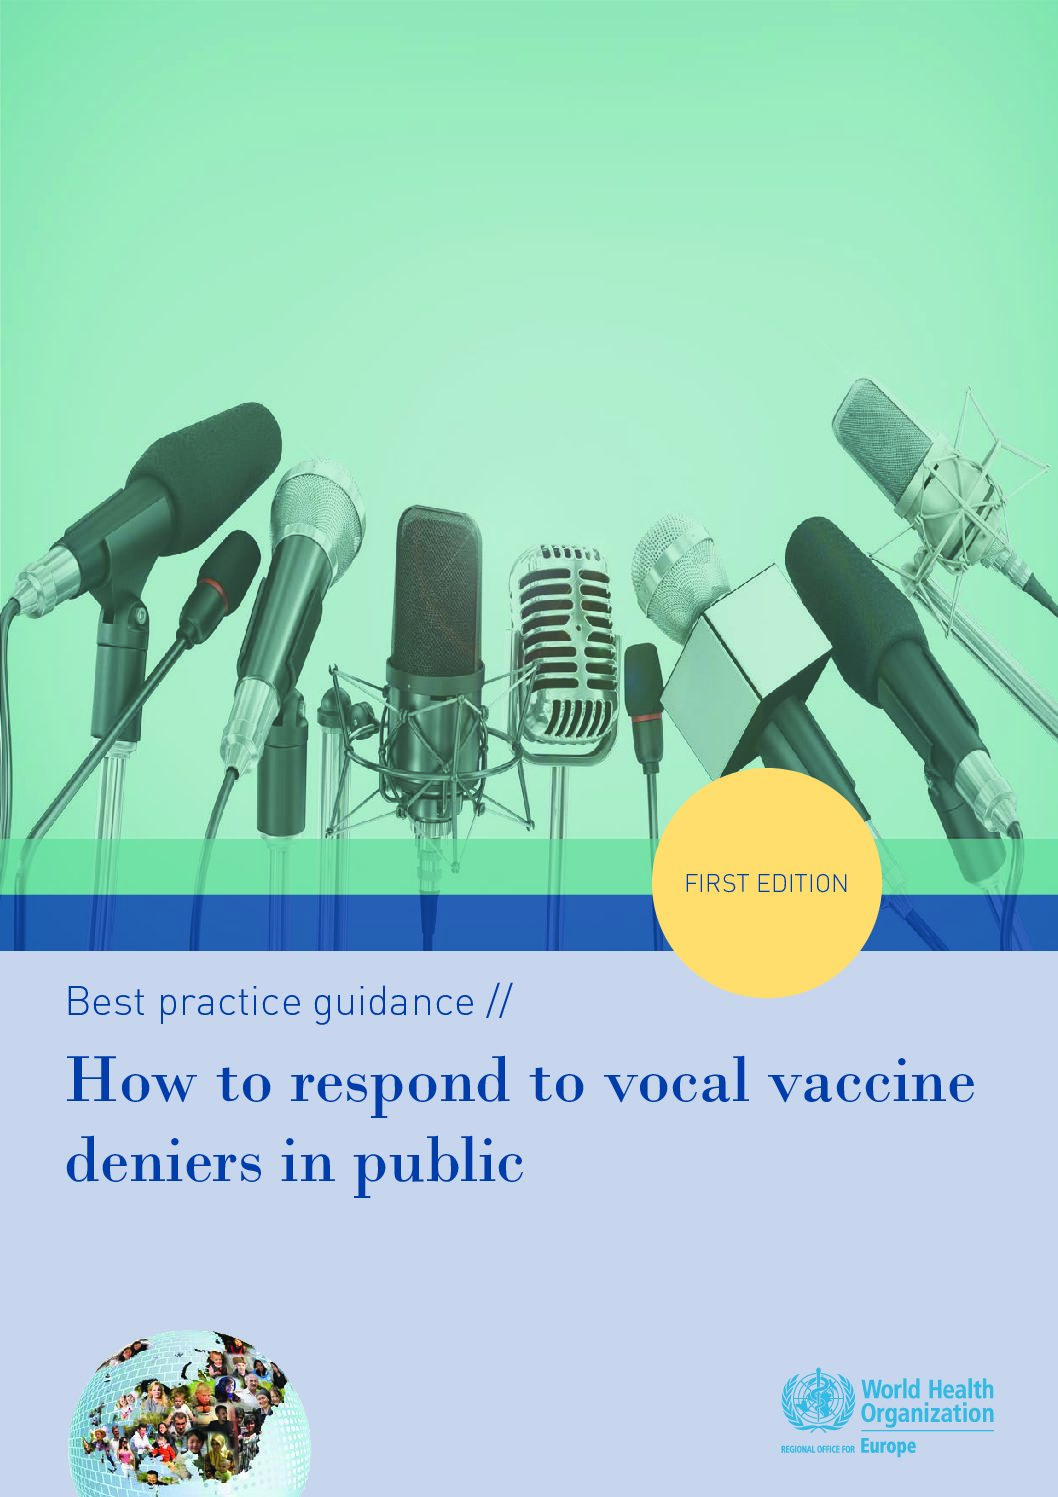 Best Practice Guidance on how to Respond to Vocal Vaccine Deniers in Public